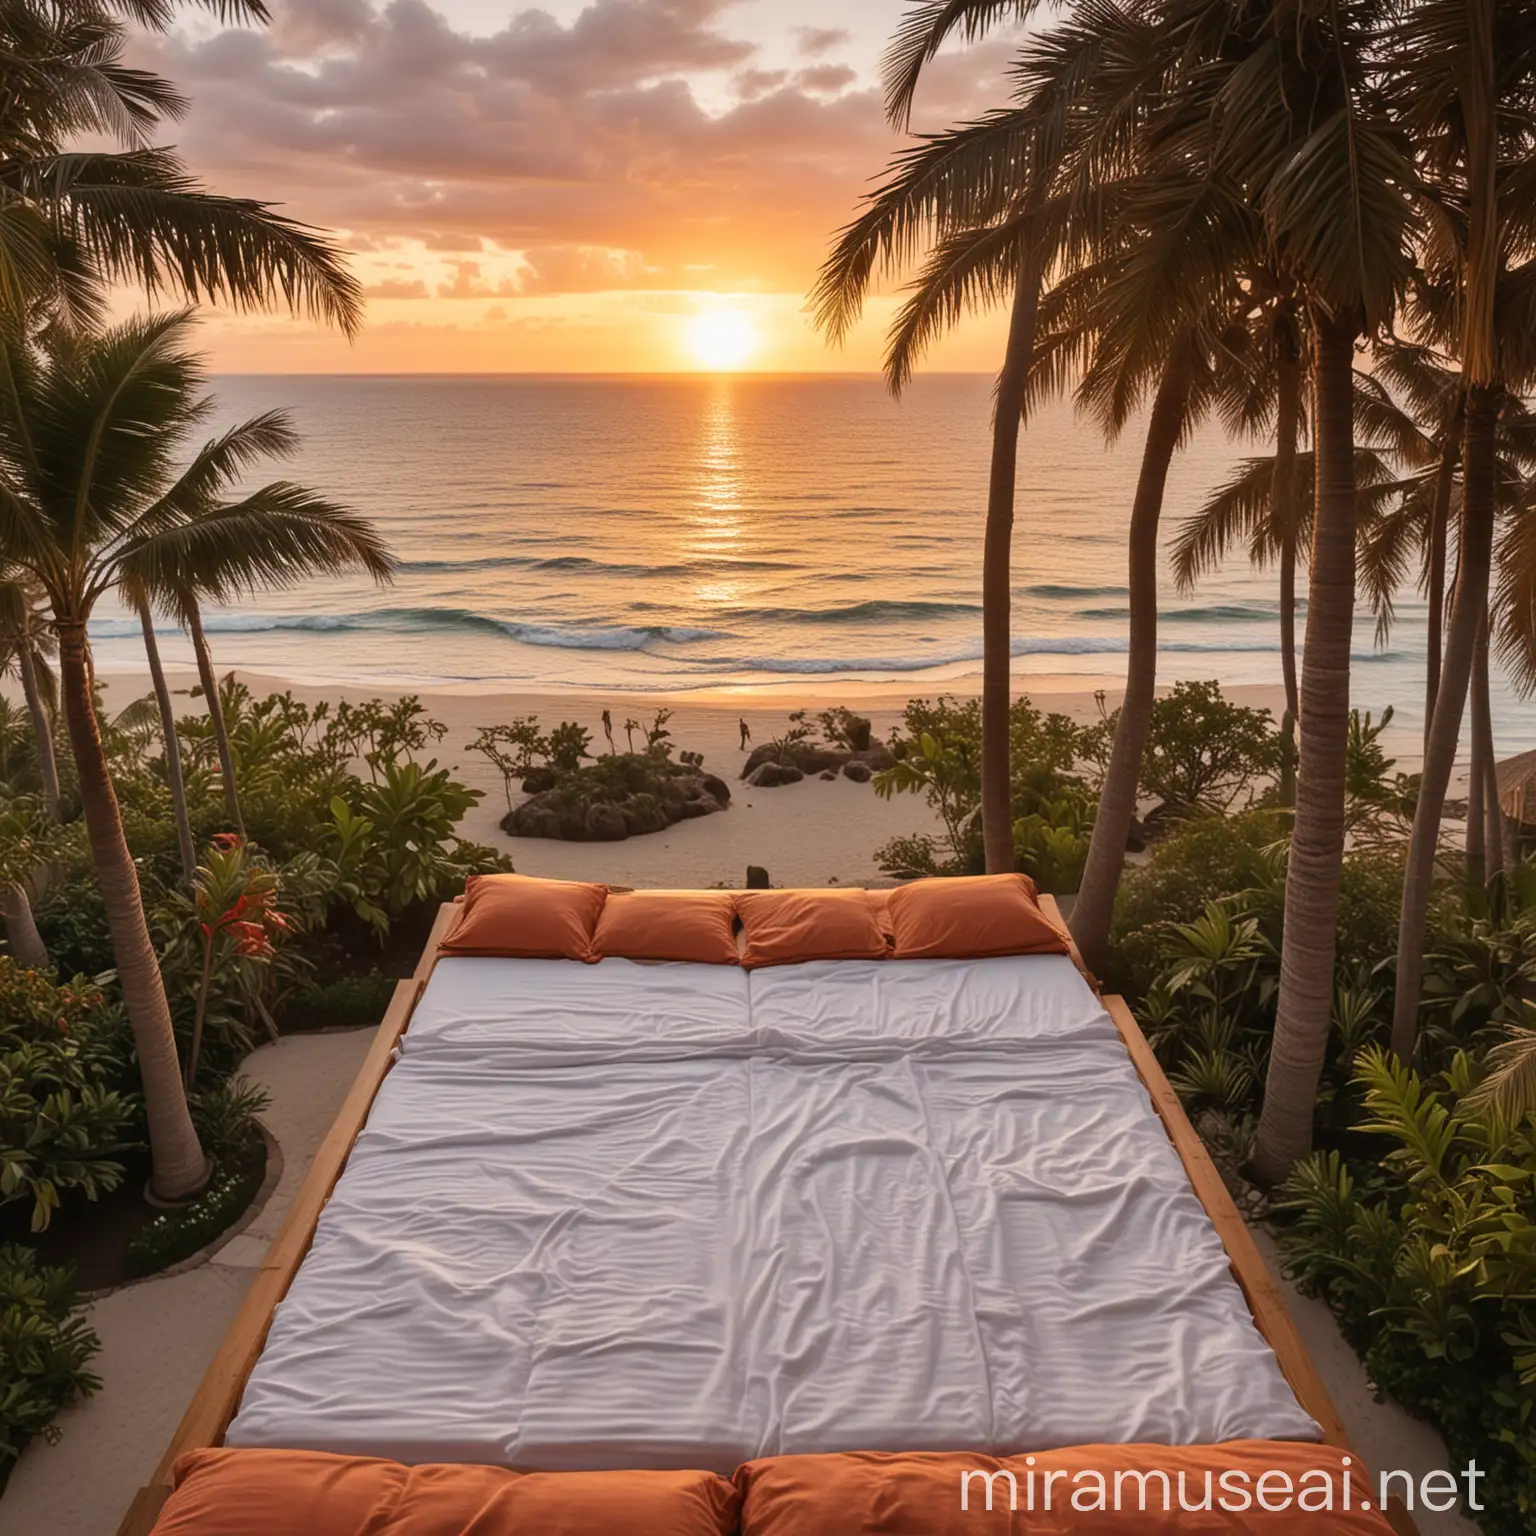 view from above of tropical hotel bed, ocean and palm trees visible outside, sunset